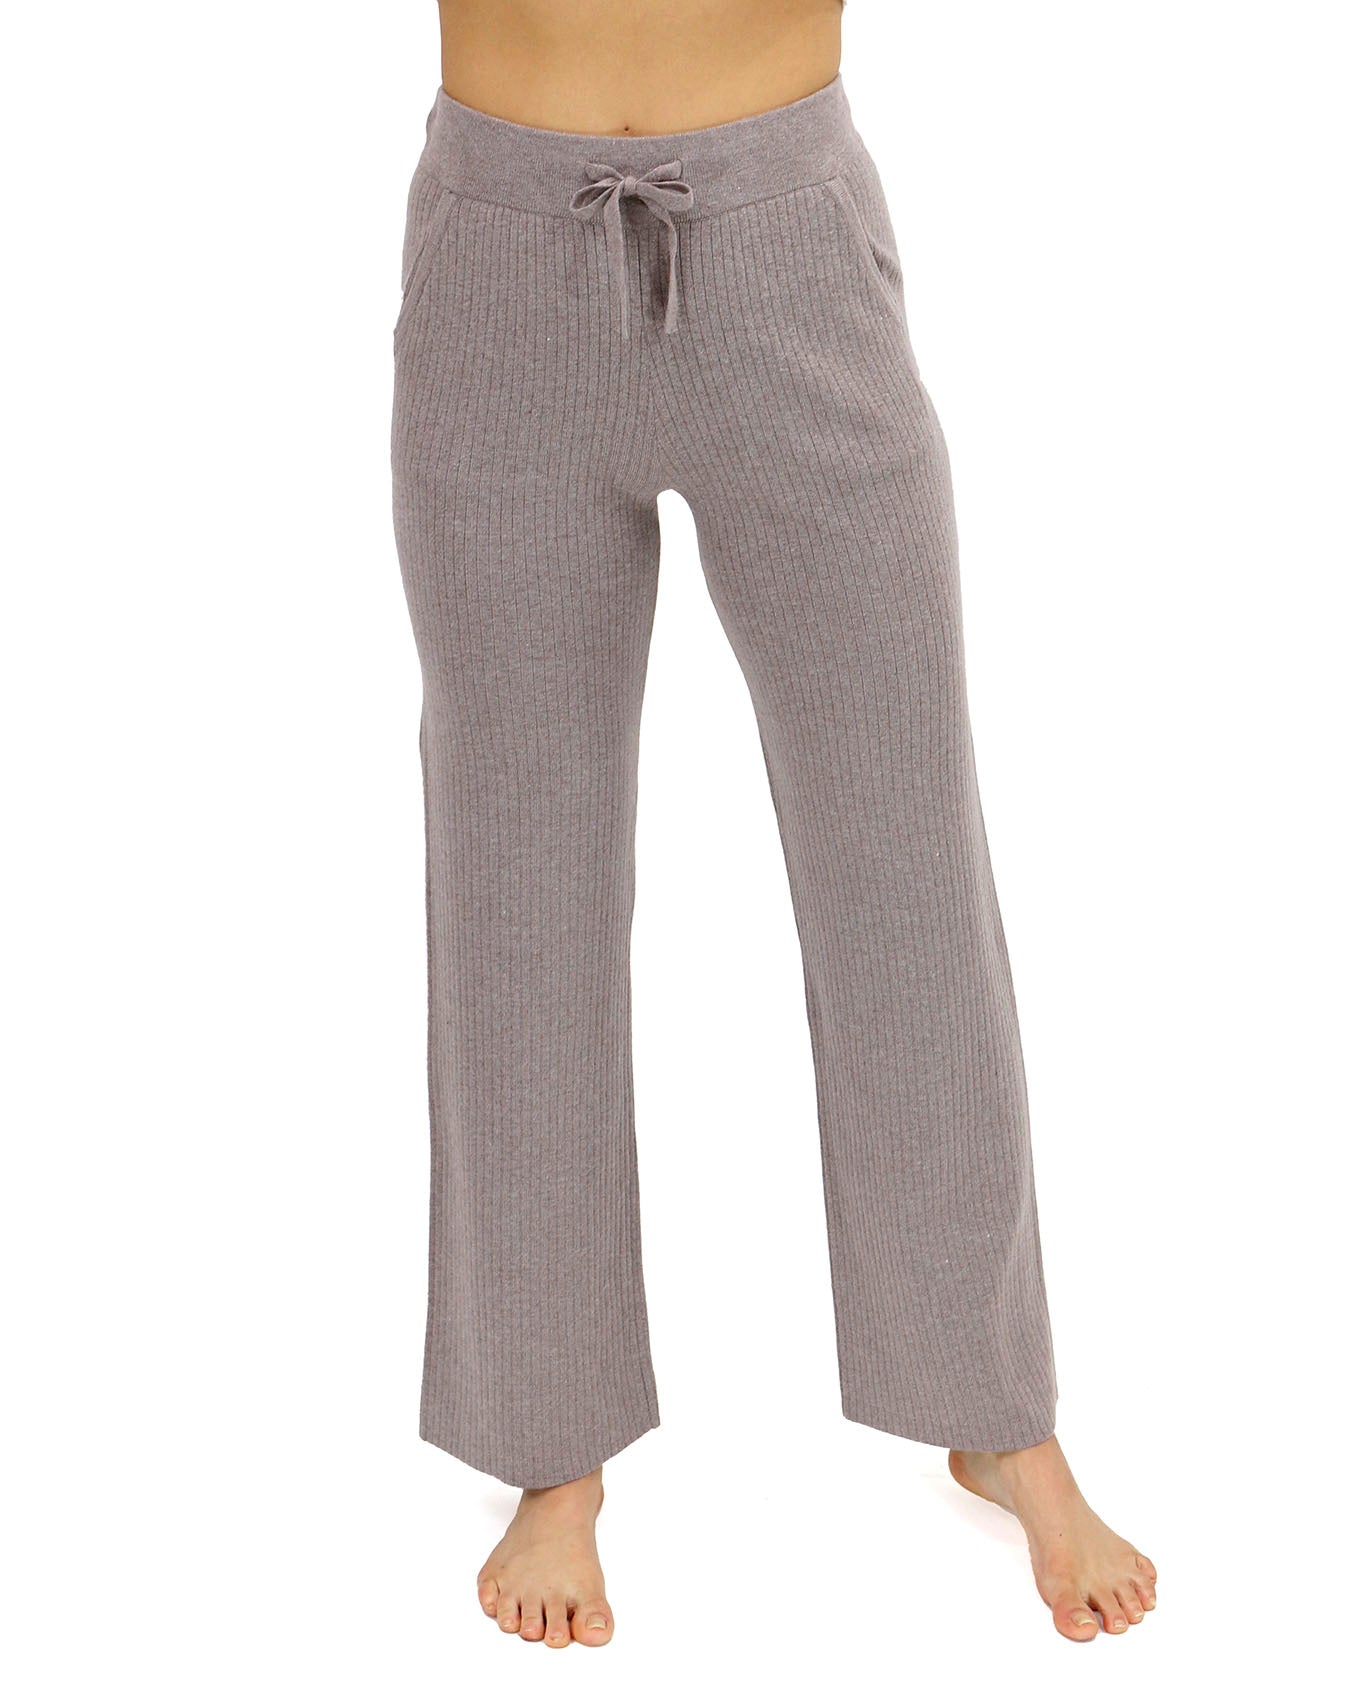 Classic & Cozy Almondine Ribbed Sweater Pants - Grace and Lace